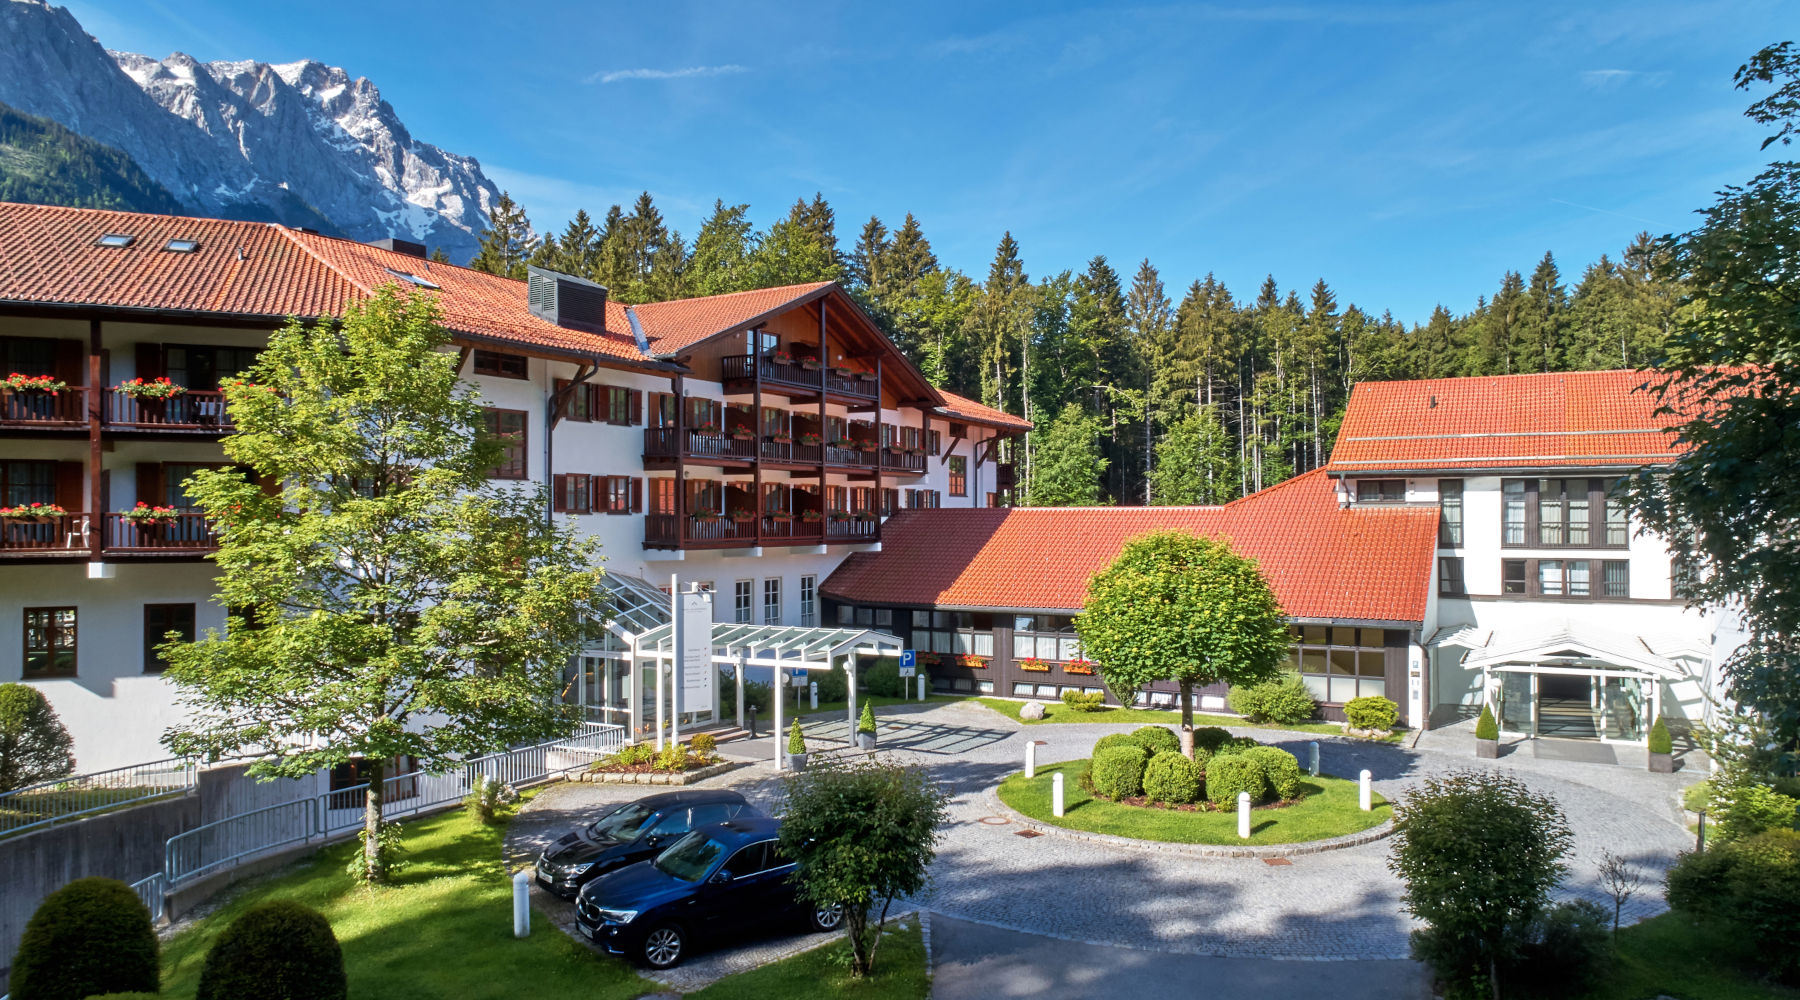 Hotel am Badersee - Getting Here